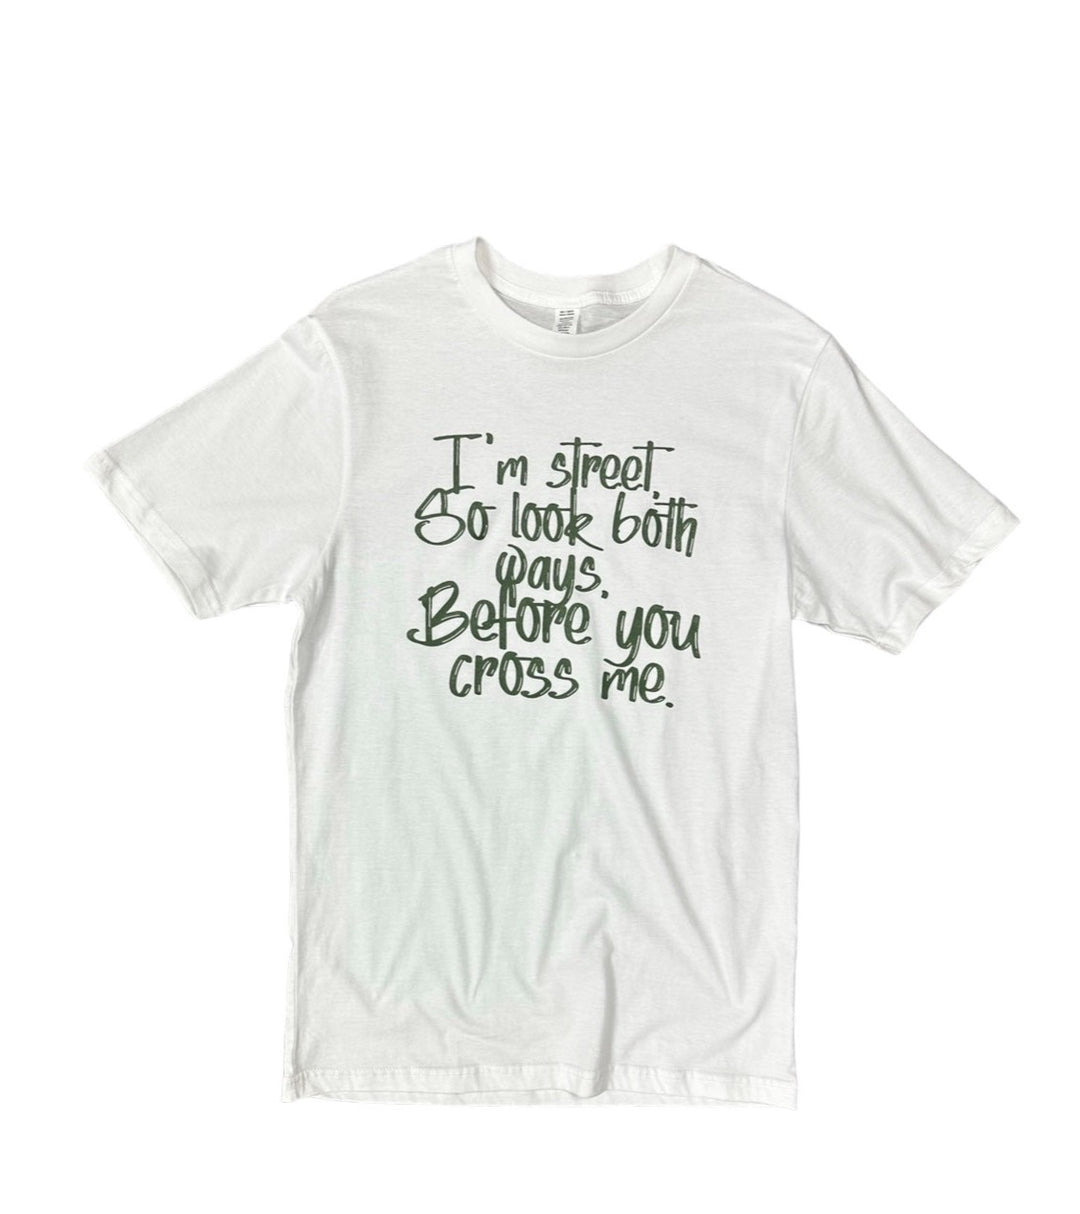 a white t - shirt with green writing on it